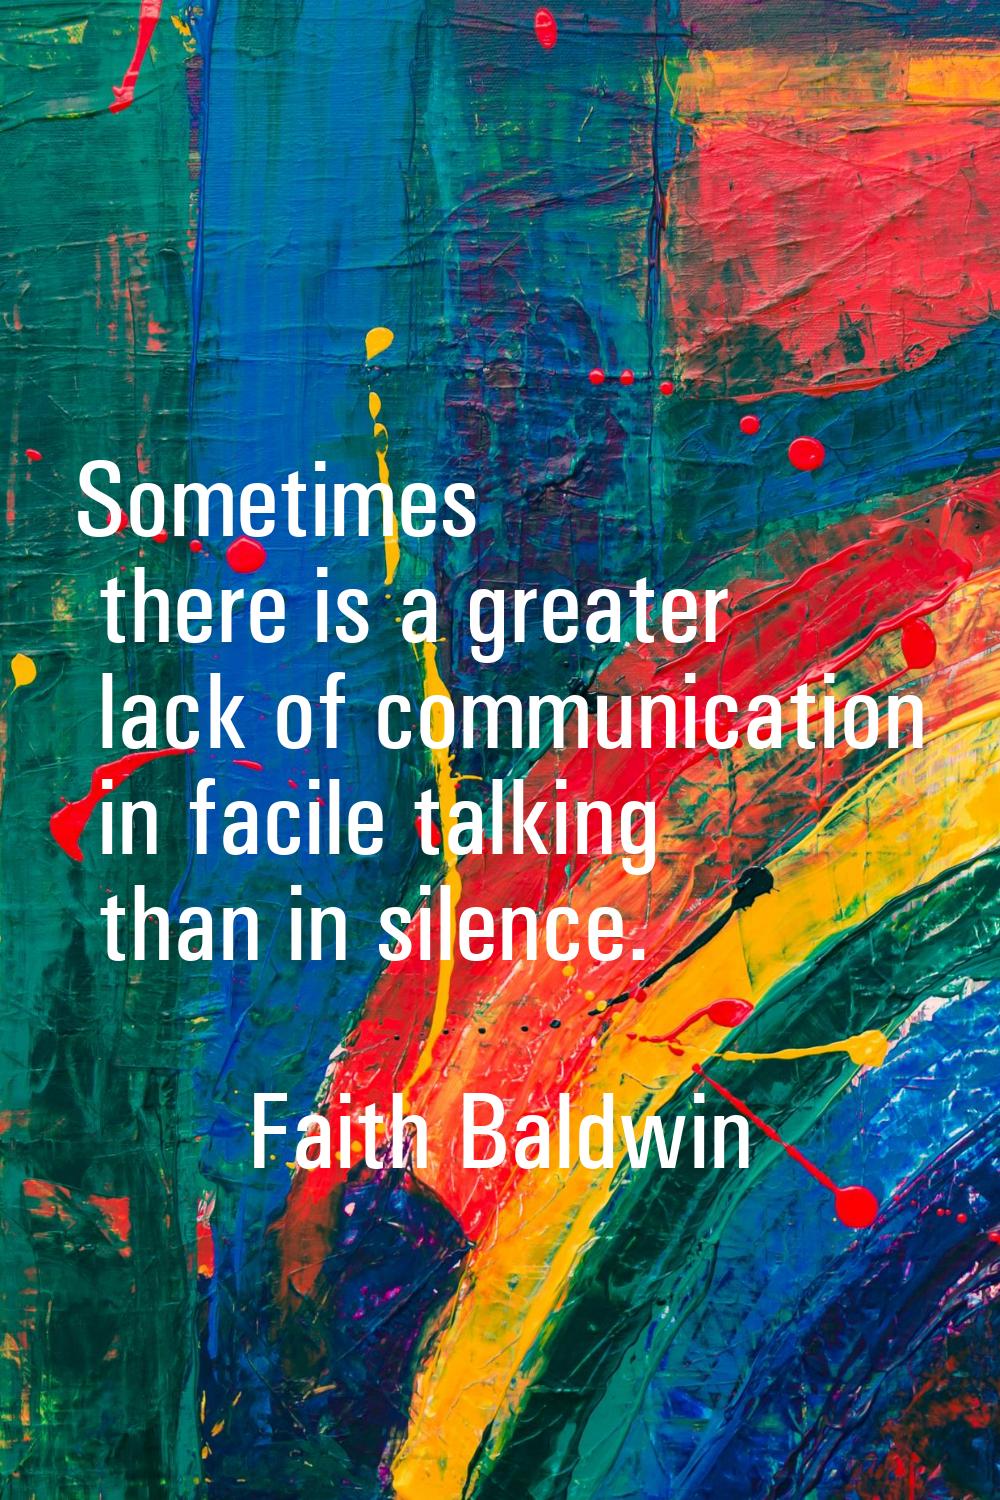 Sometimes there is a greater lack of communication in facile talking than in silence.